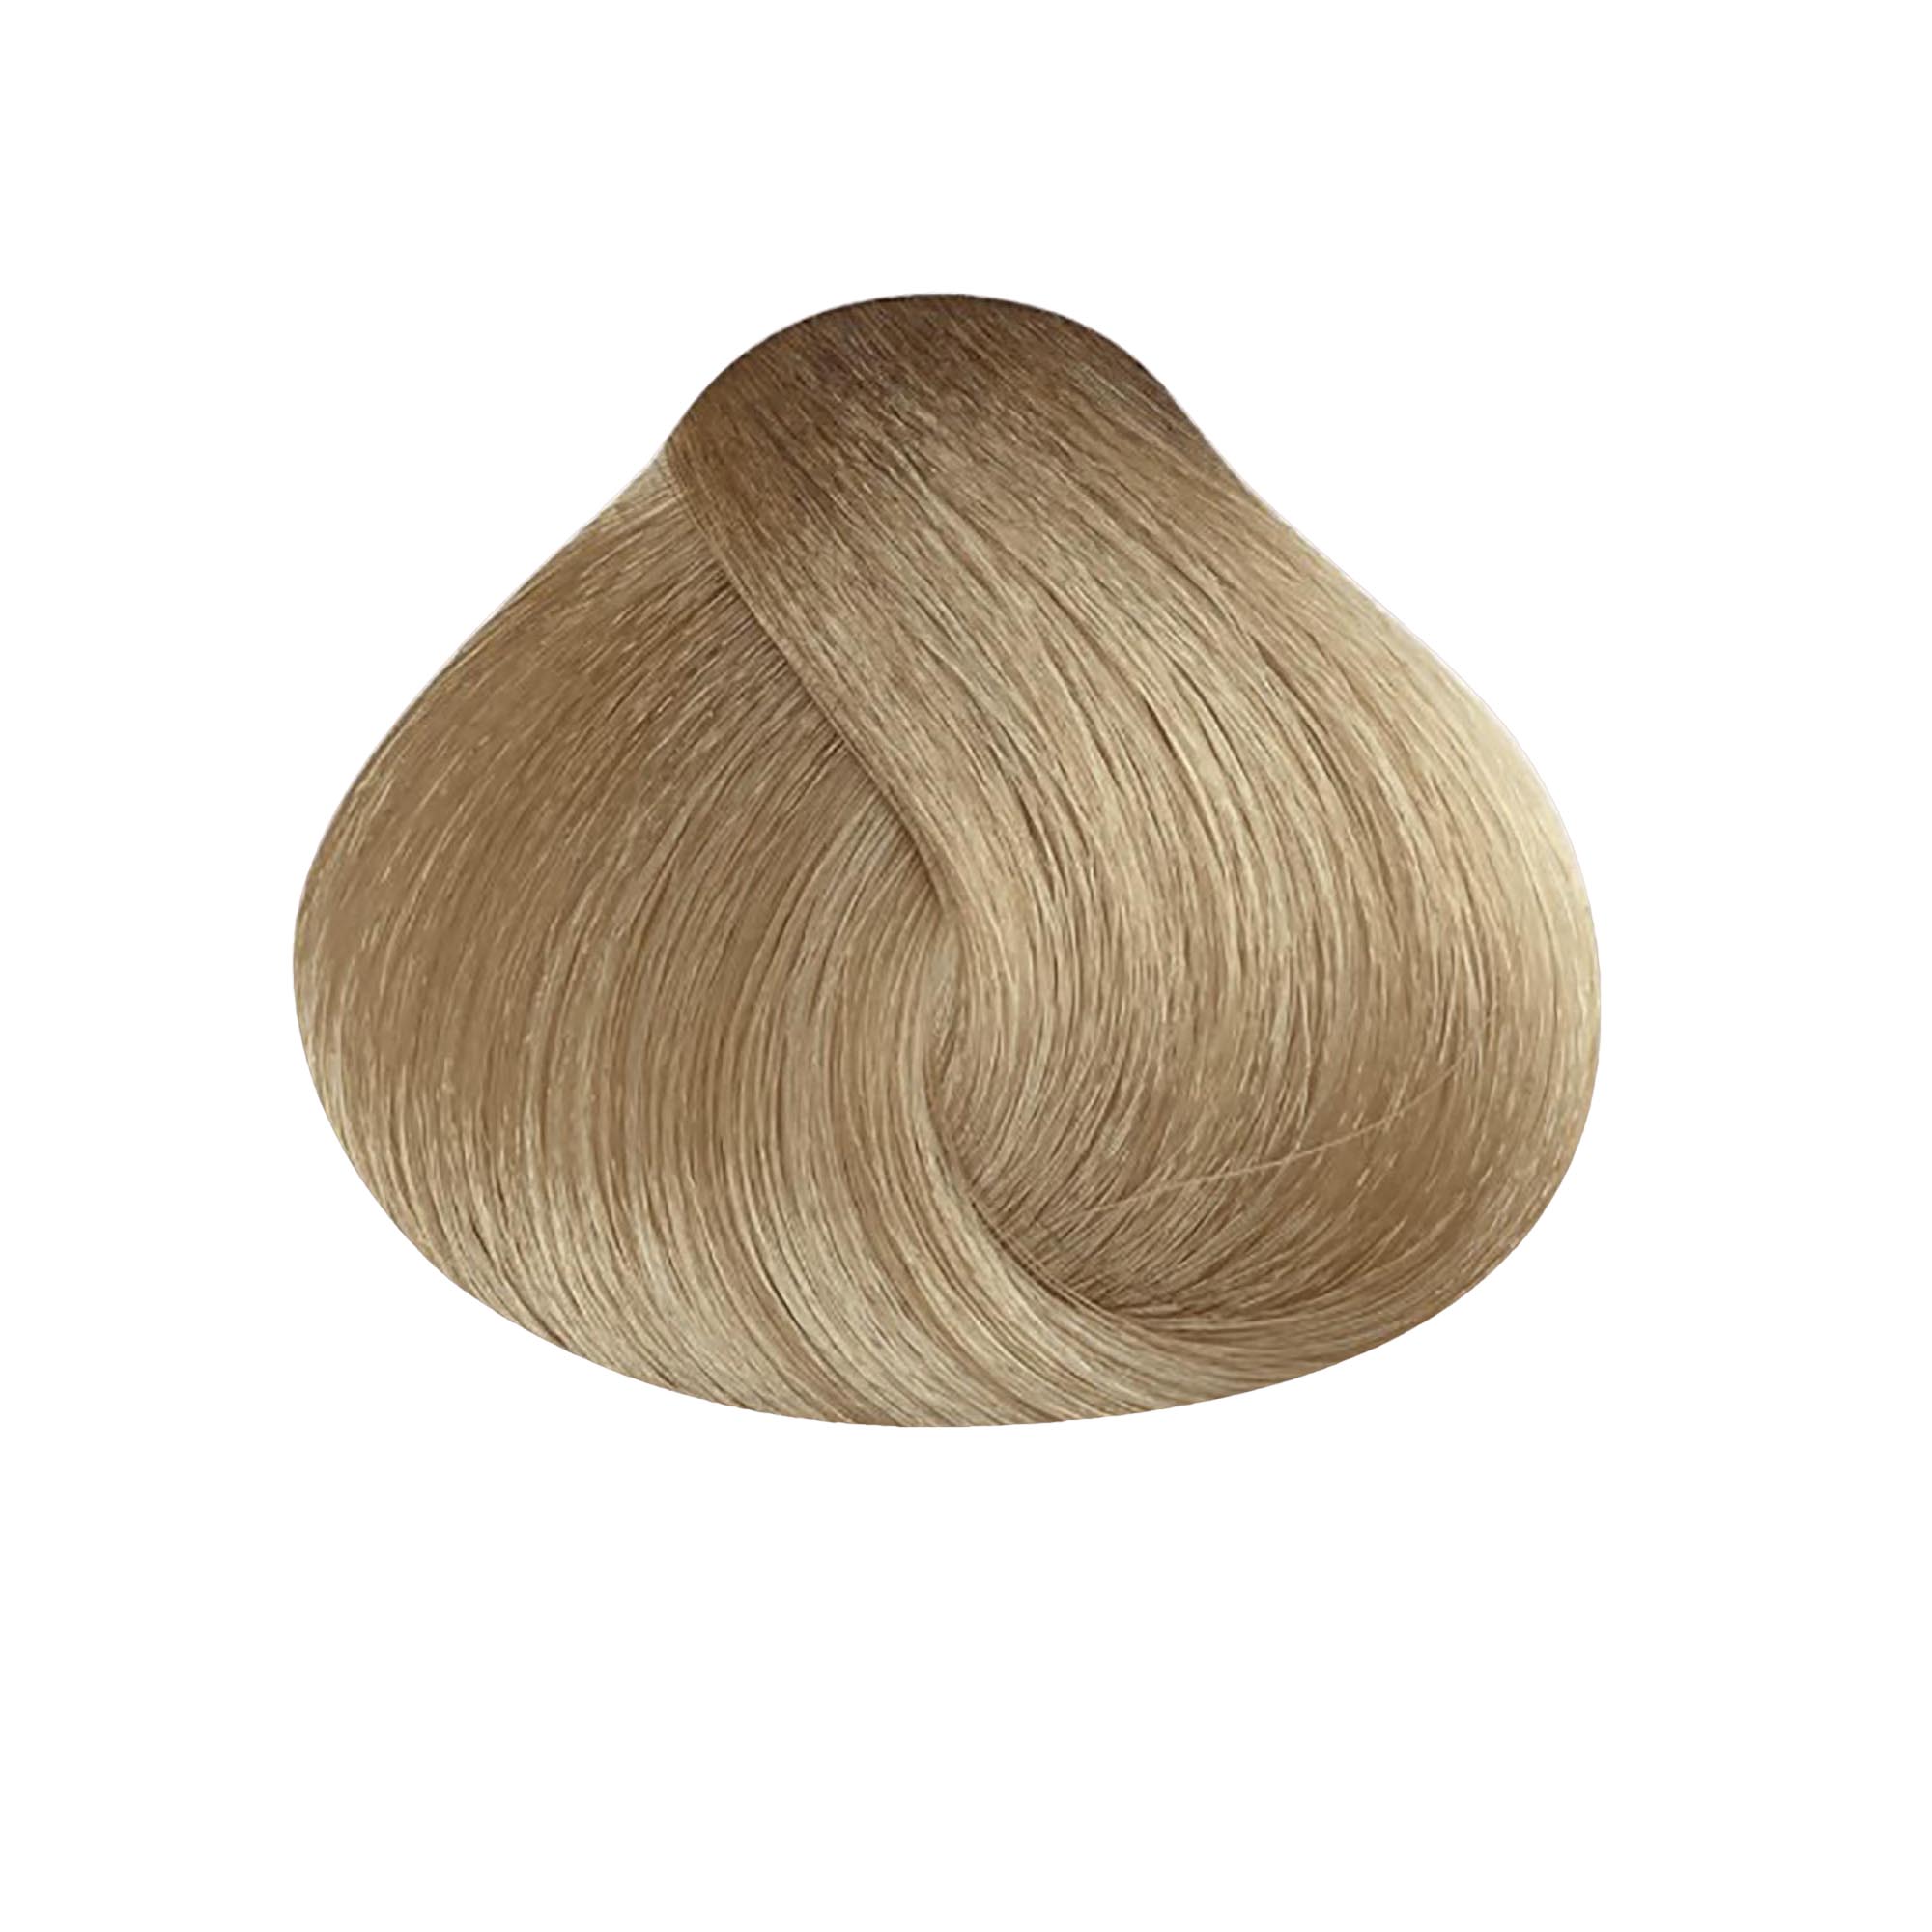 Satin Professional Hair Color / 9N Very Light Blonde / Swatch